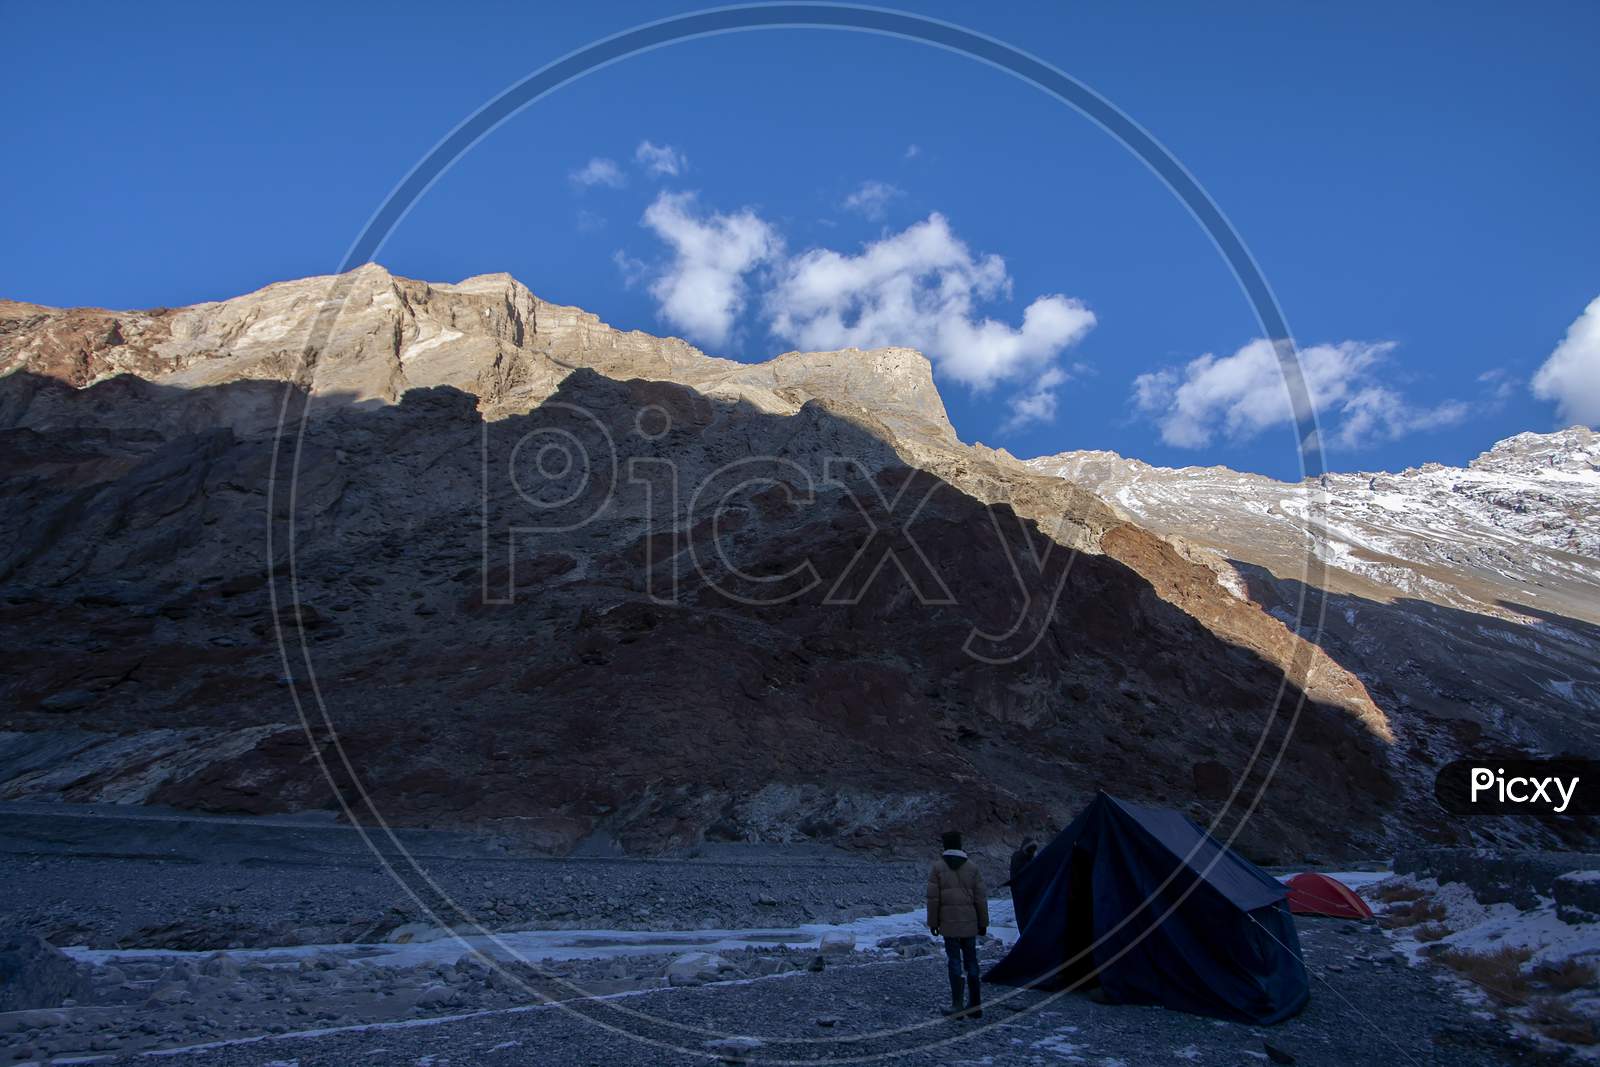 Tenting Ground With Tents In Front Of High Altitude Peaks And Its Shadow In A Cold Sunny Day In The Himalaya In Ladakh